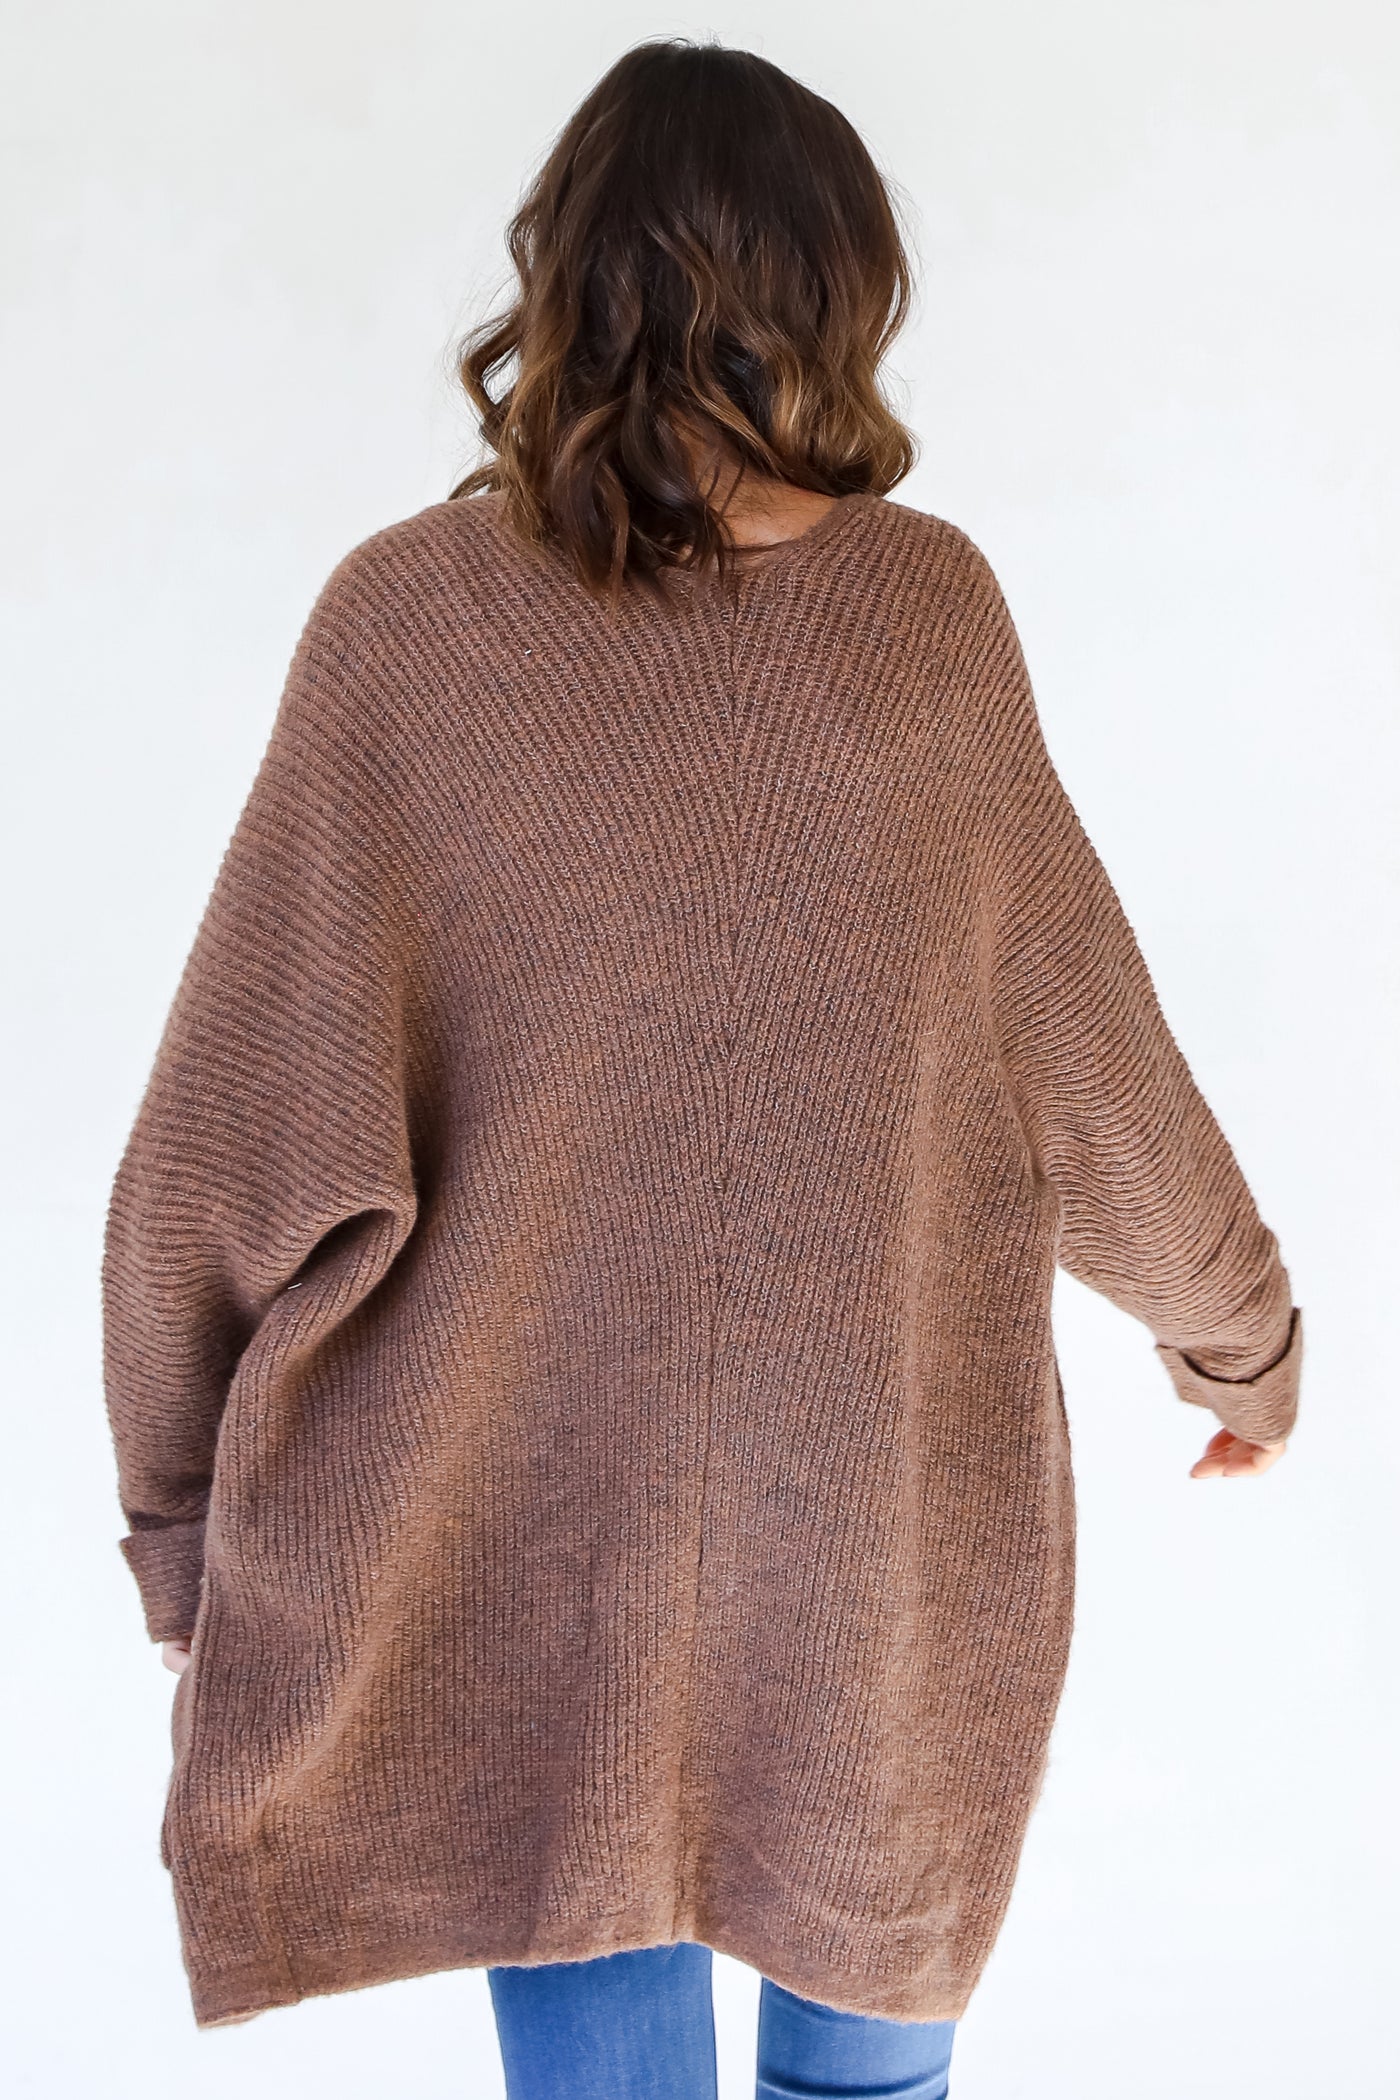 Sweater Cardigan in brown back view